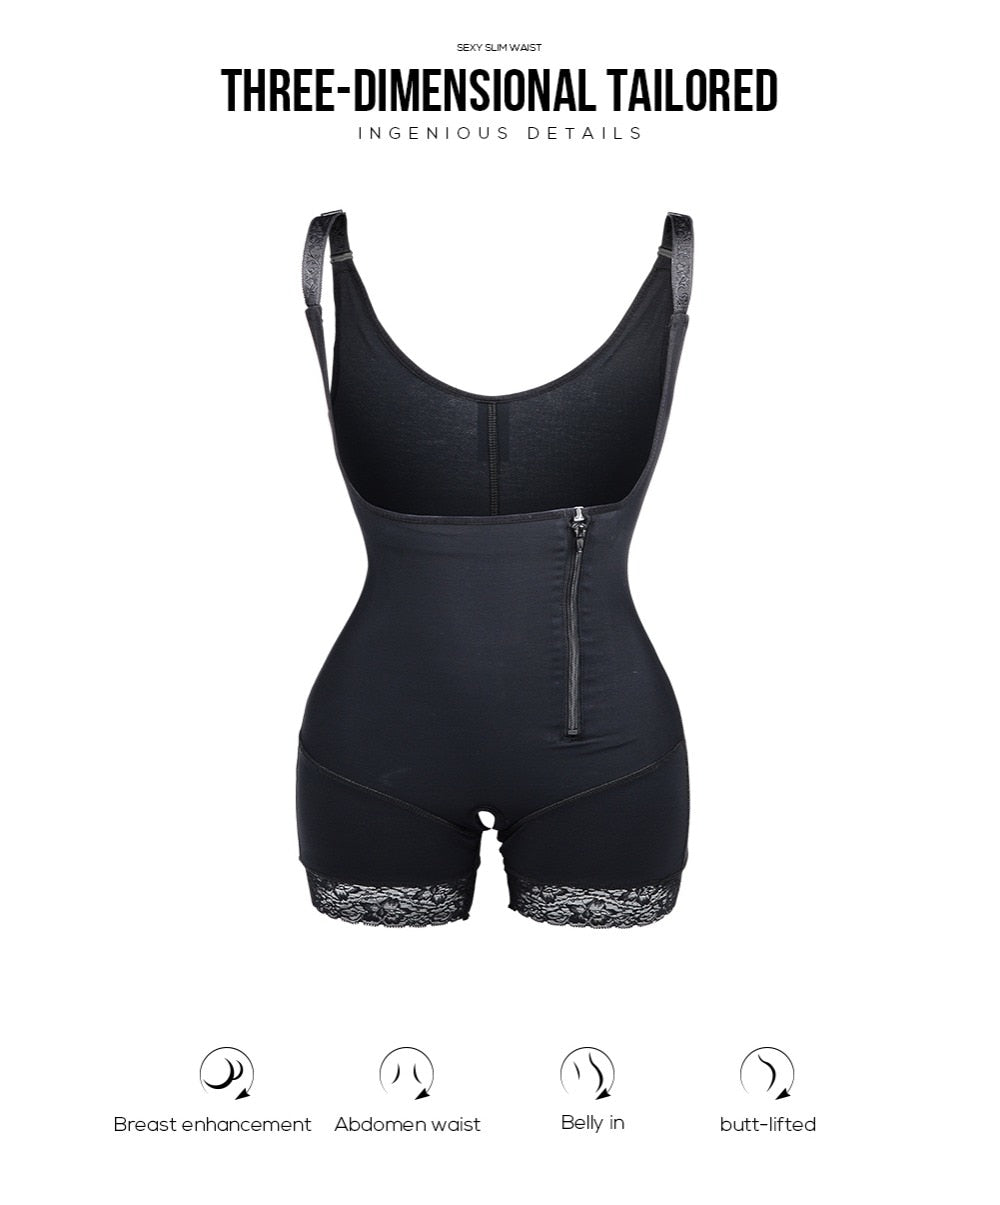 Slimming Shaper Waist Corset for the Curvaceous Girl